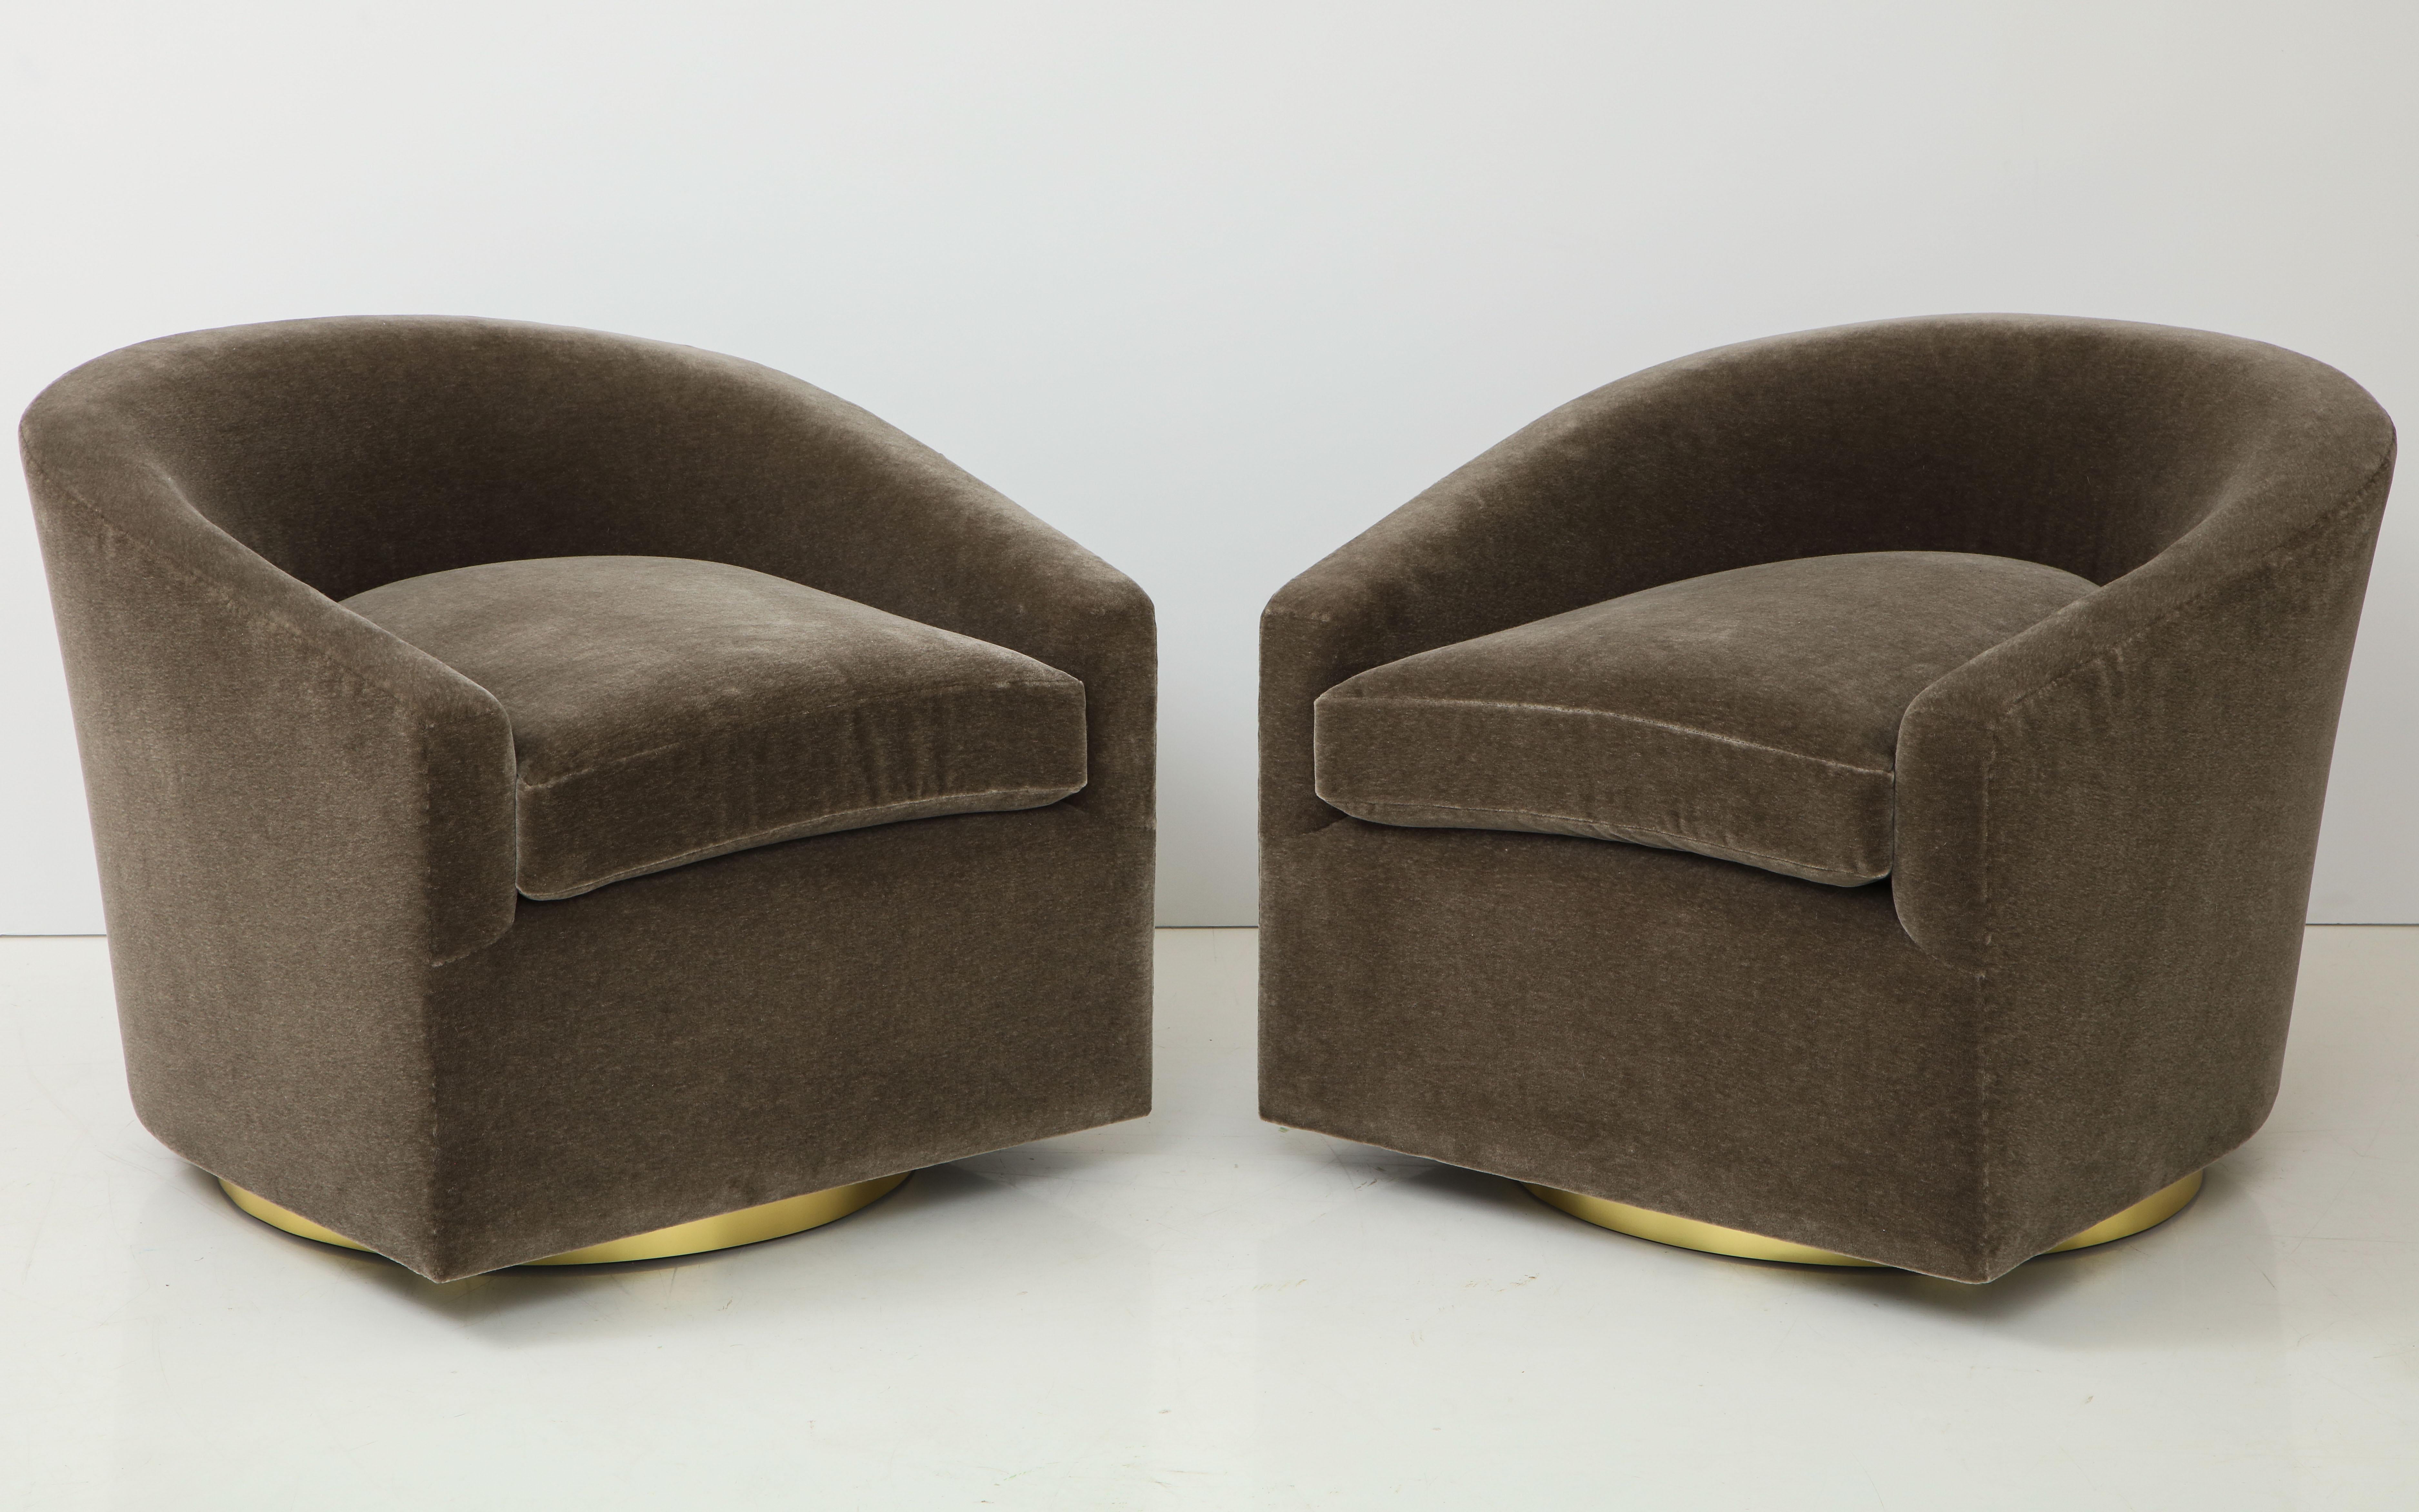 Pair of 1970's swivel club chairs.
The chairs have been newly reupholstered in a luxurious
Taupe brown mohair fabric.
The chairs sit on brass trimmed swivel bases.